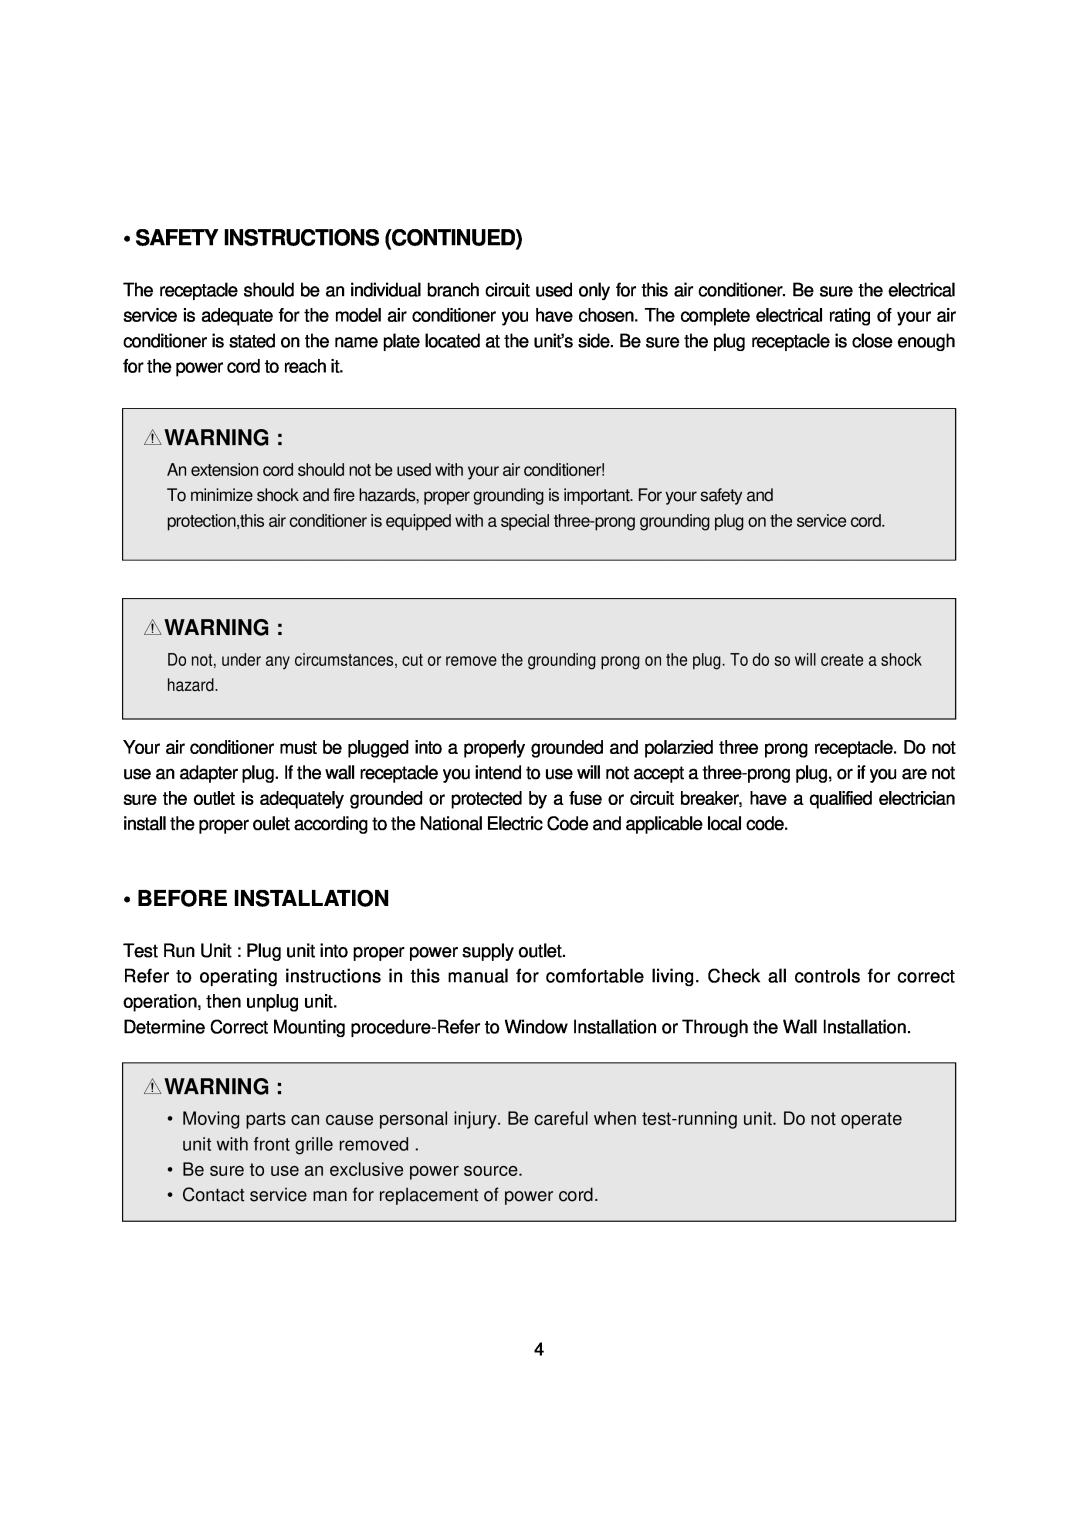 Daewoo DWA-122CS, DWC-100CS, DWC-121CS, DWA-150CS, DWA-151CS manual Safety Instructions Continued, Before Installation 